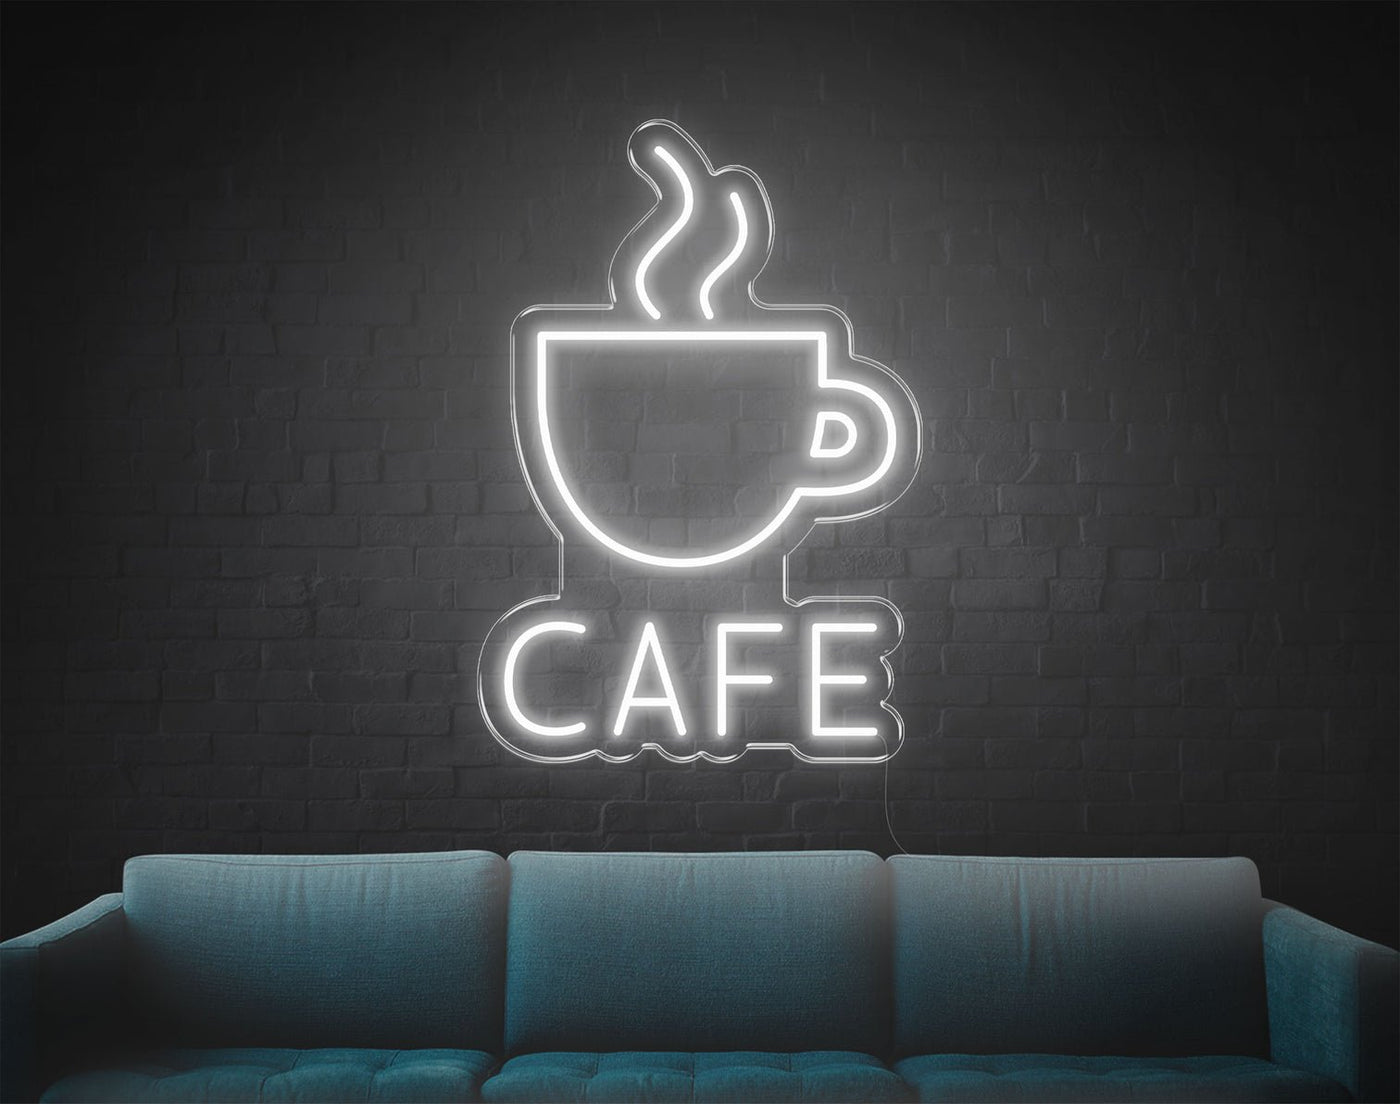 Cafe LED Neon Sign - 25inch x 17inchHot Pink